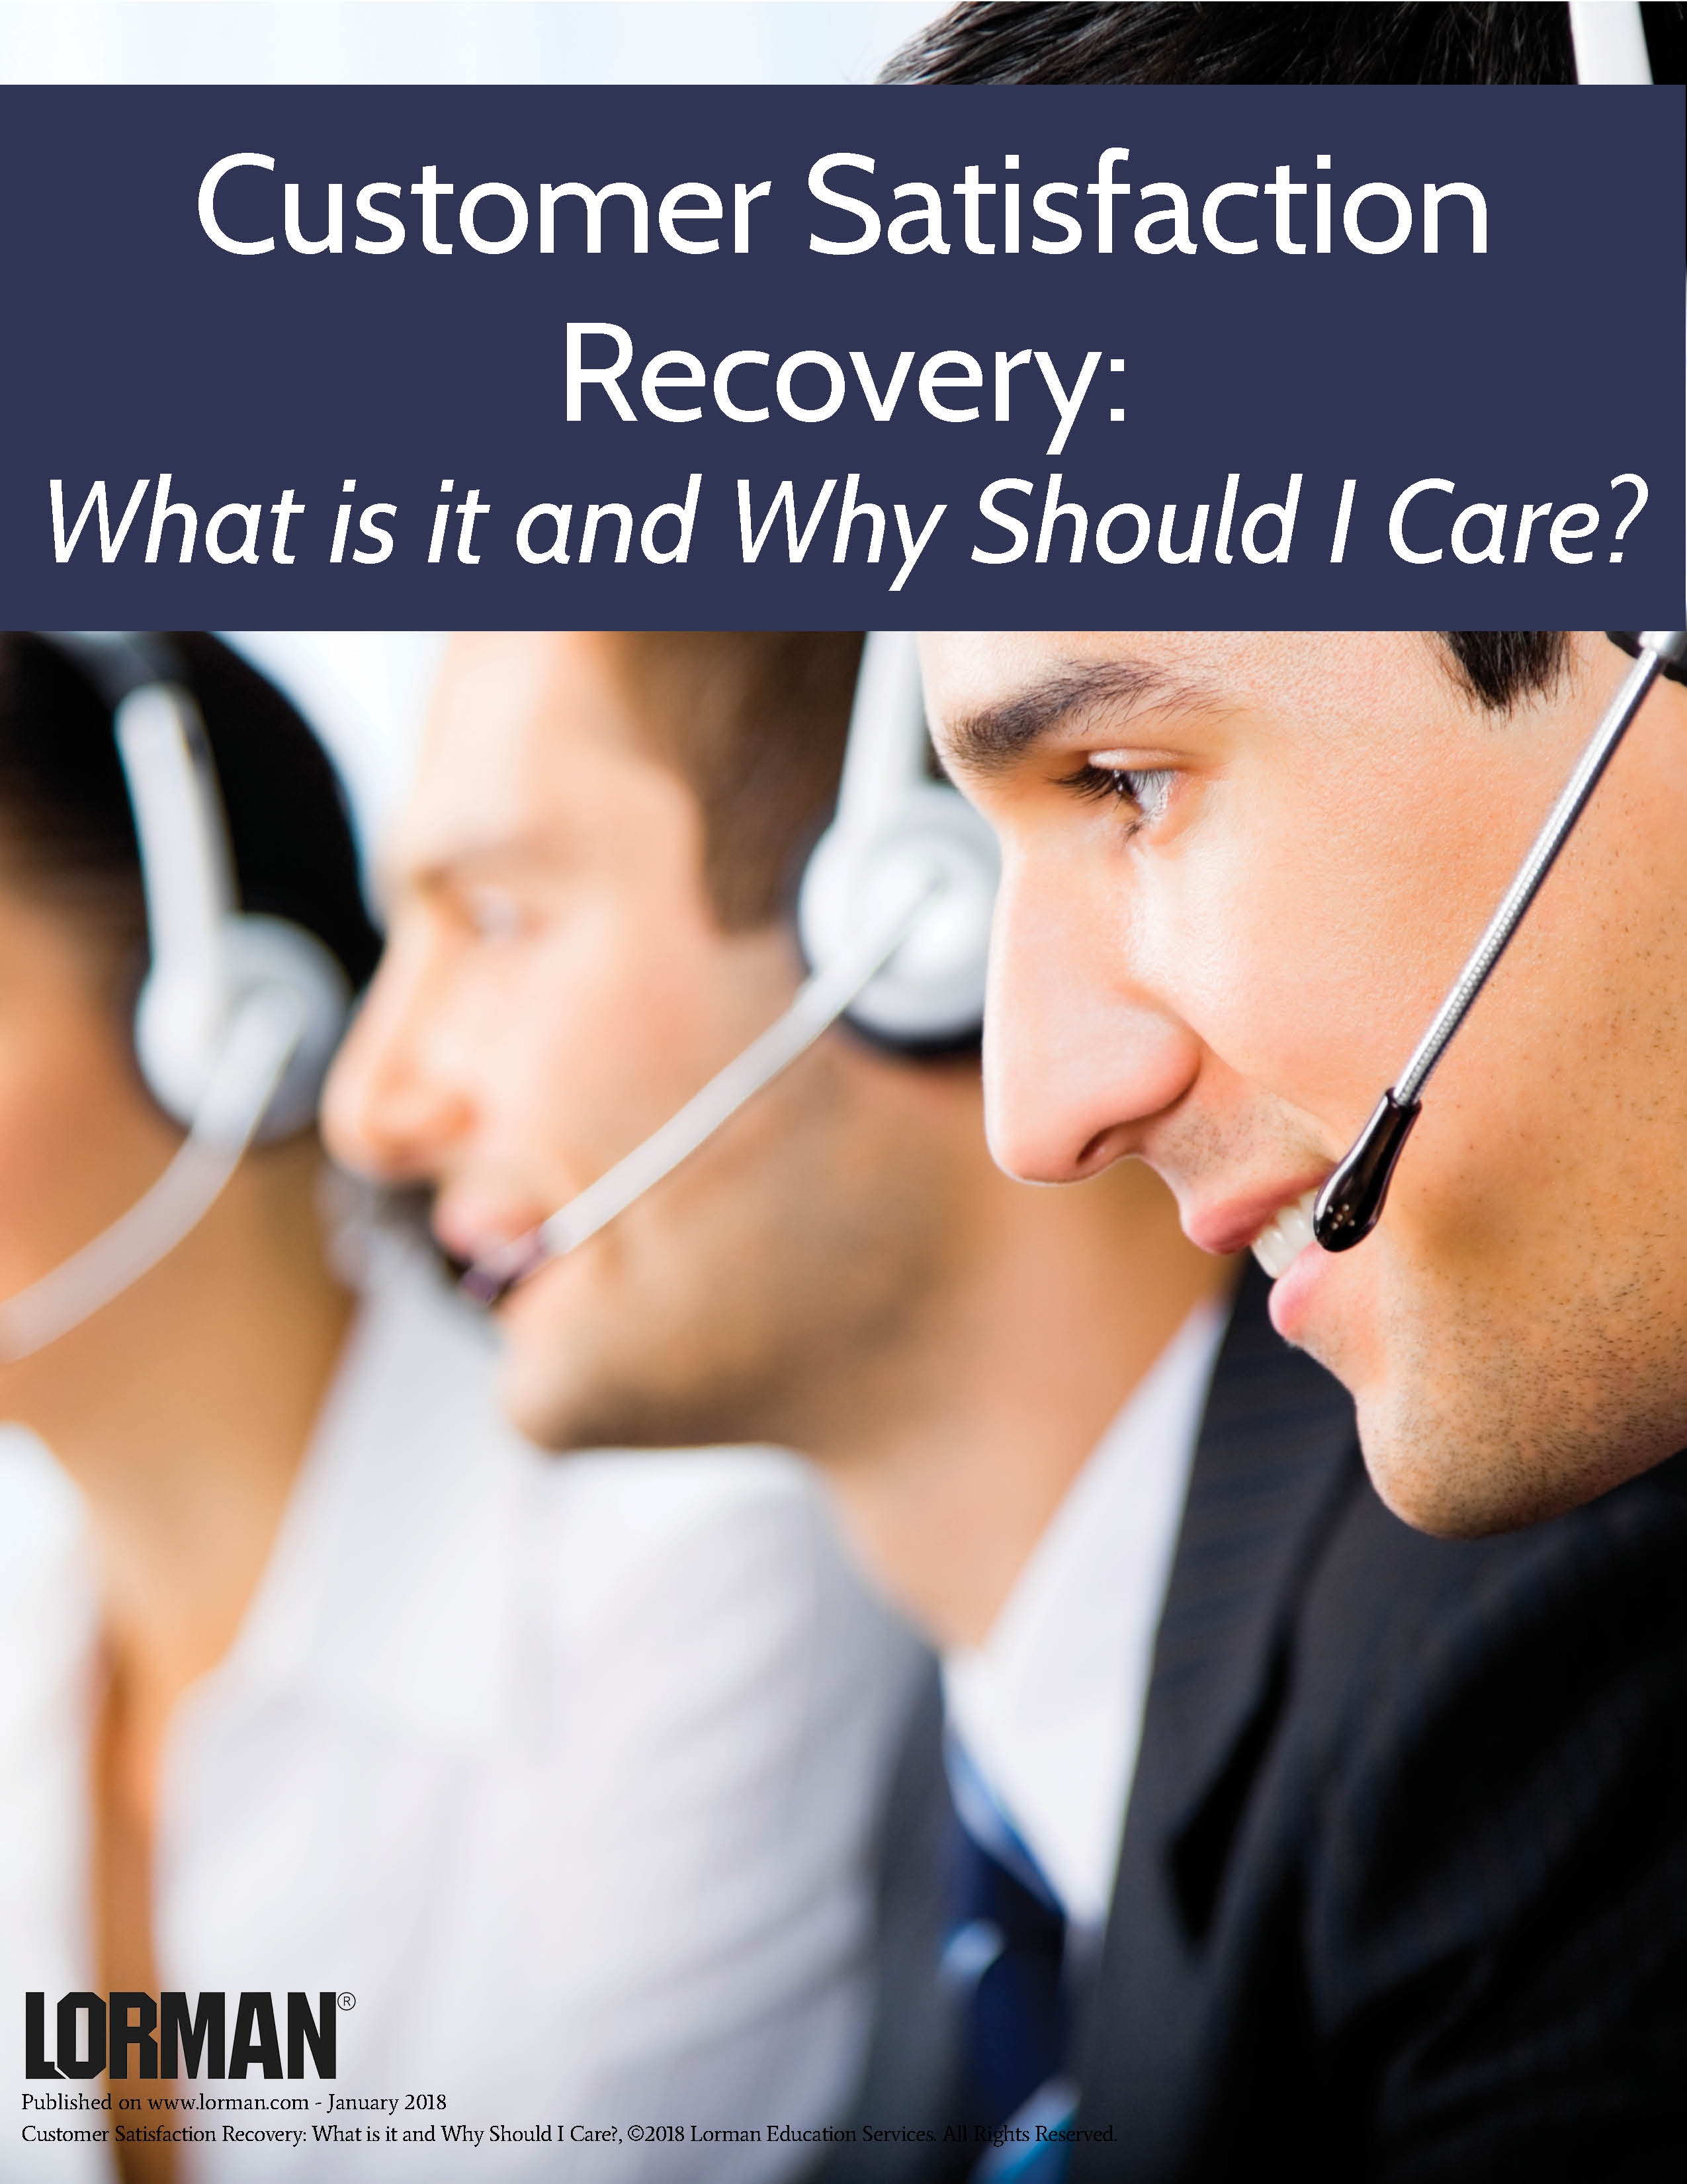 Customer Satisfaction Recovery: What is it and Why Should I Care?